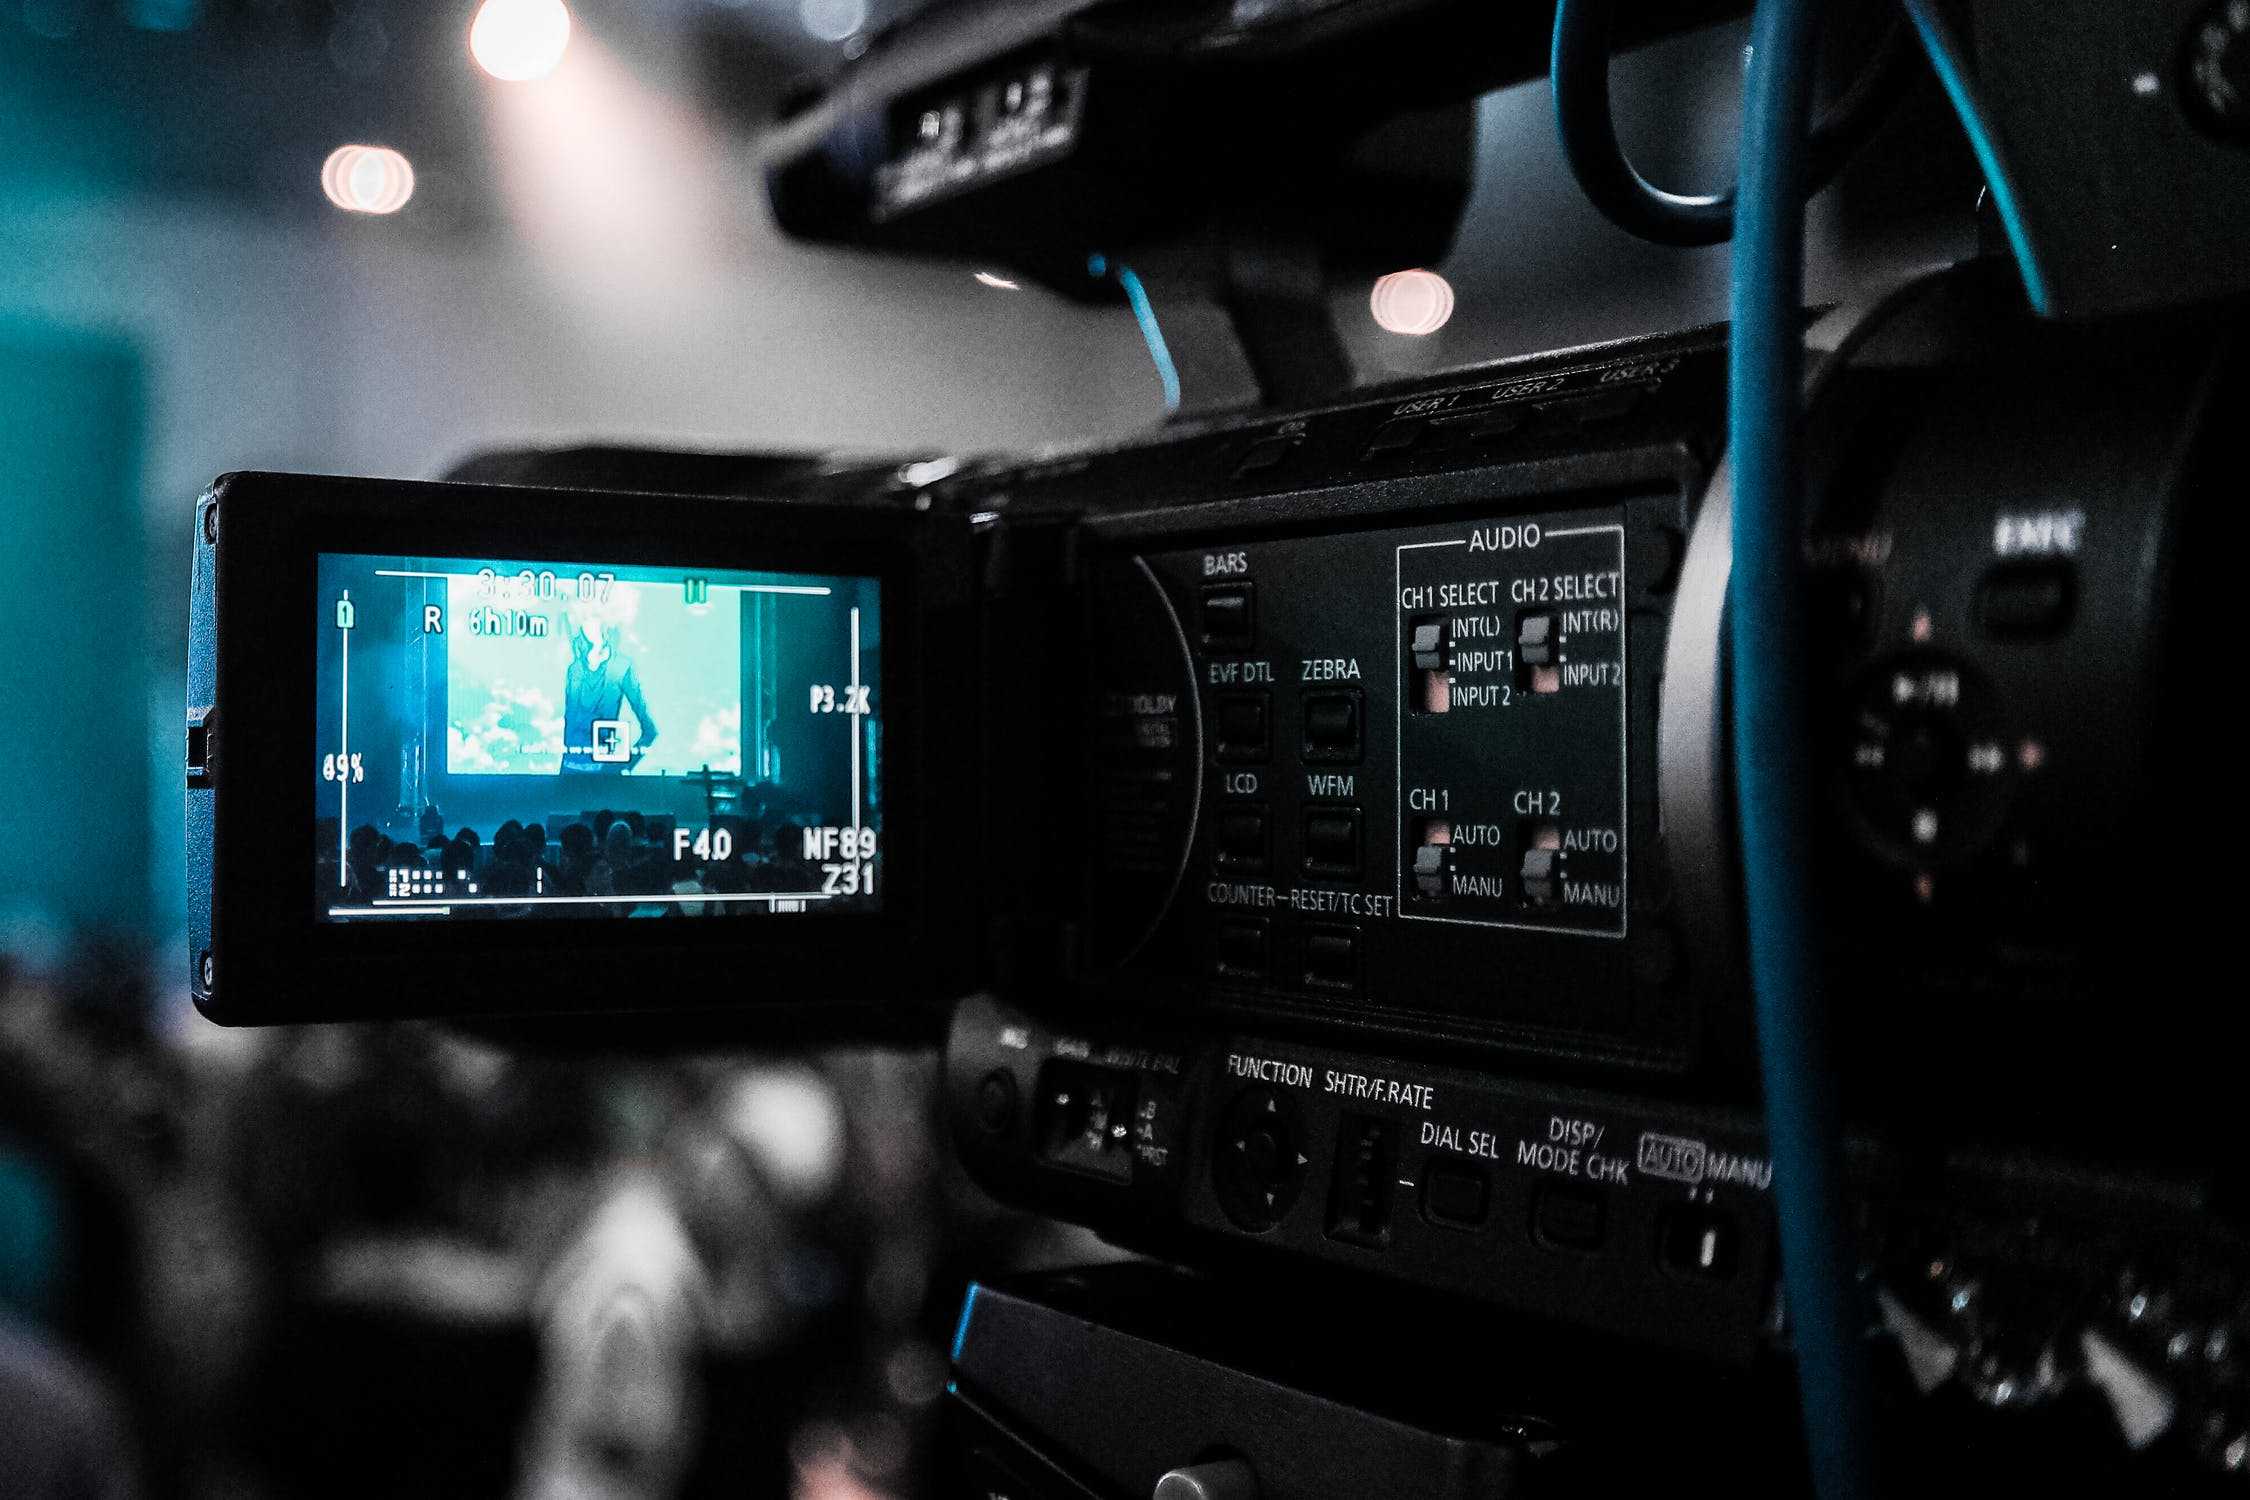 6 ways brands will be using video by 2022.